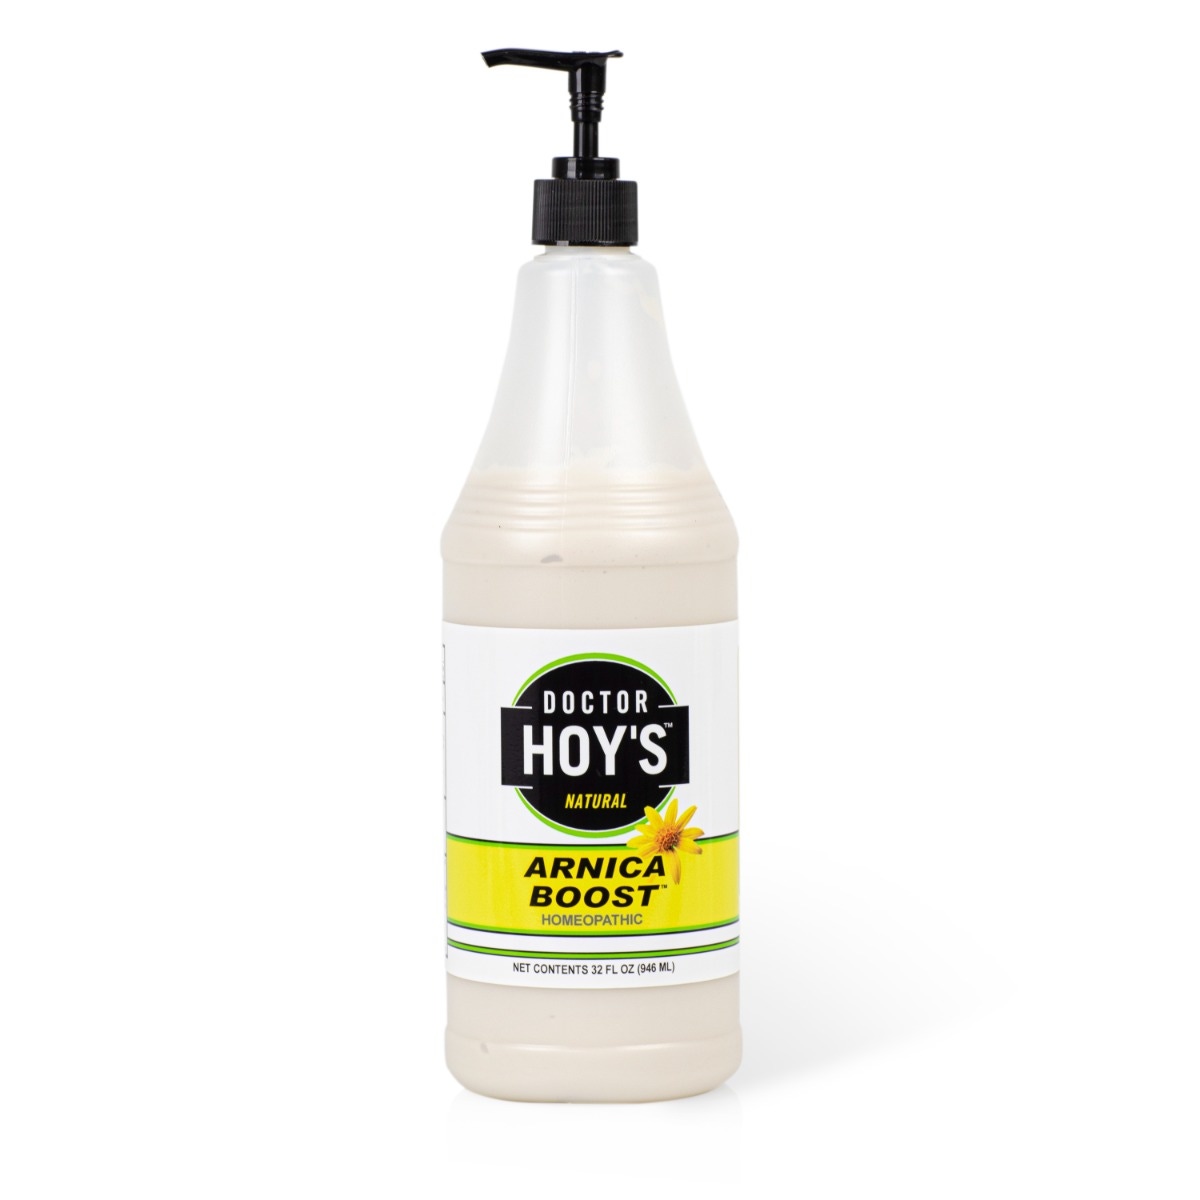 Doctor Hoy’s Arnica Boost Pain Relief